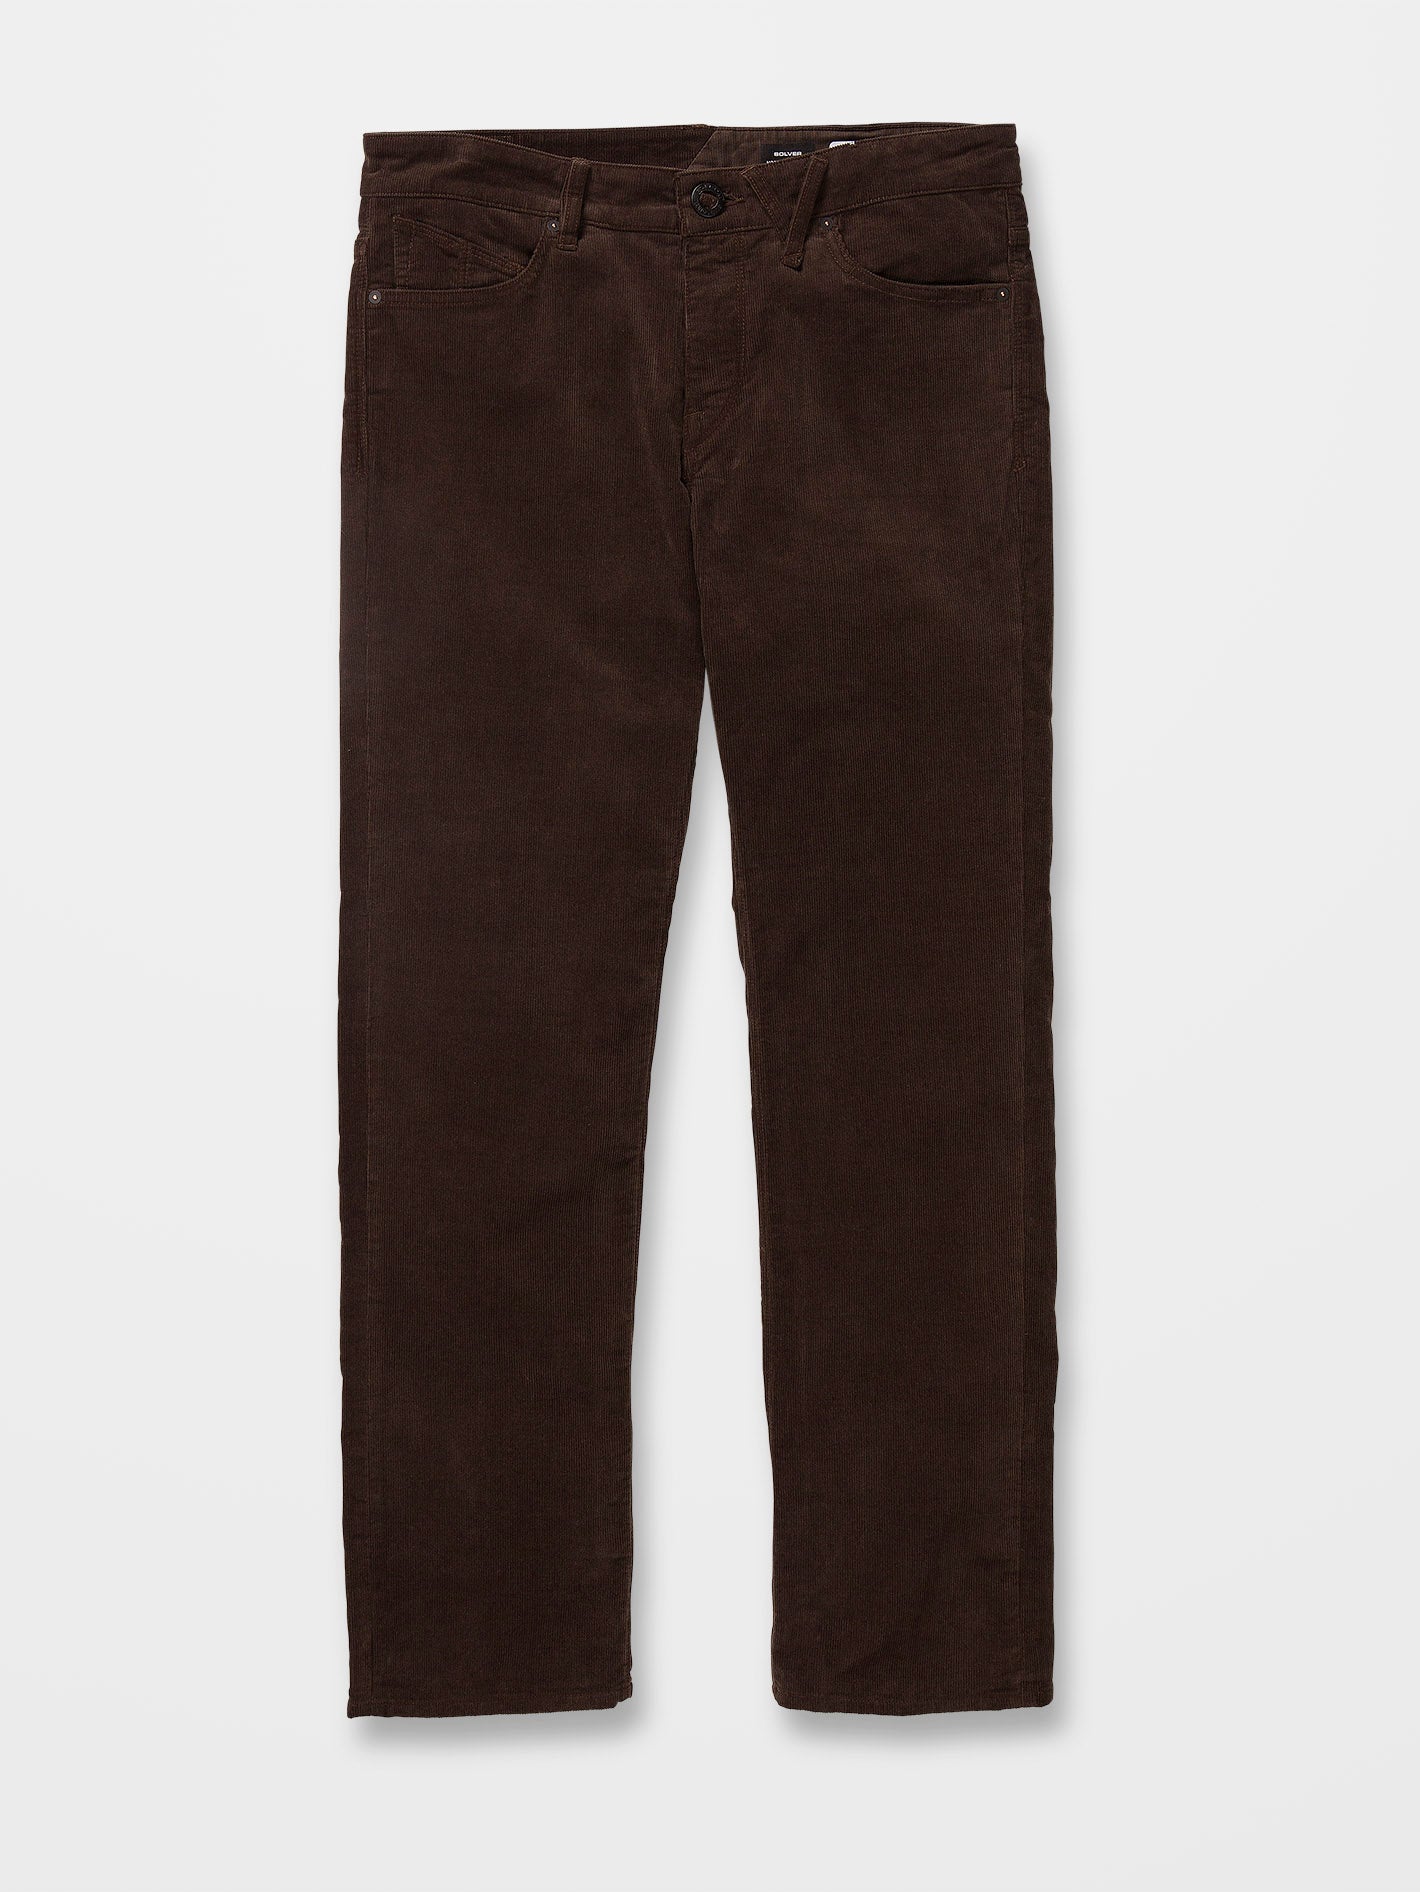 Brown Corduroy Trousers, Men's Country Clothing